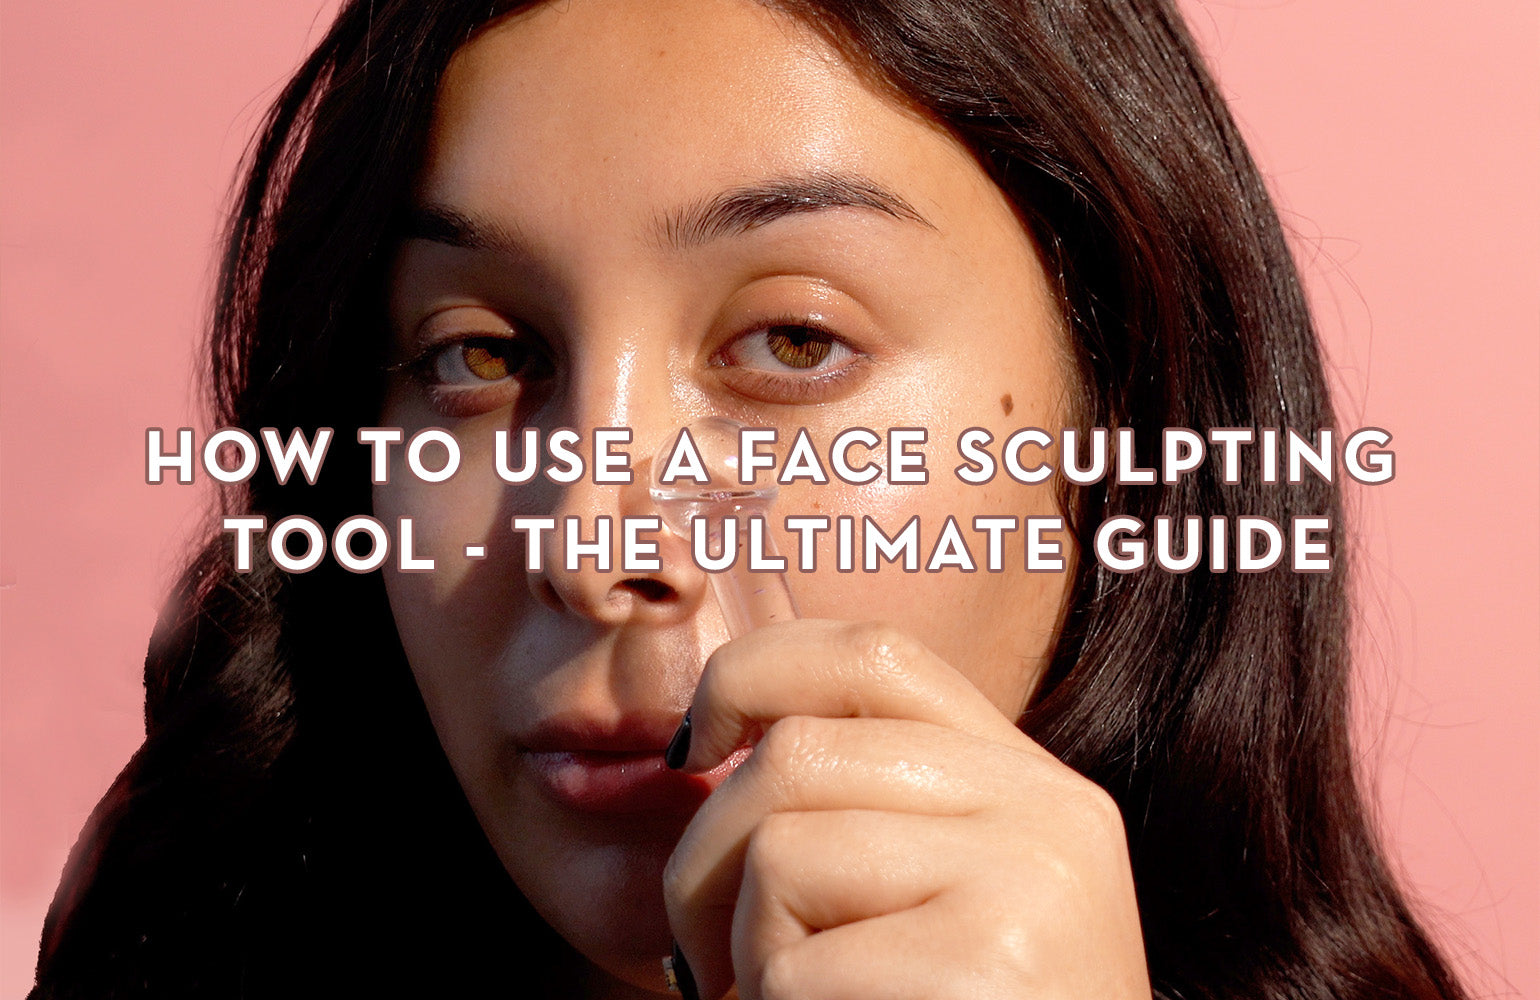 http://sonage.com/cdn/shop/articles/HOW_TO_USE_A_FACE_SCULPTING_TOOL_-_THE_ULTIMATE_GUIDE_blog_banner.jpg?v=1690917463